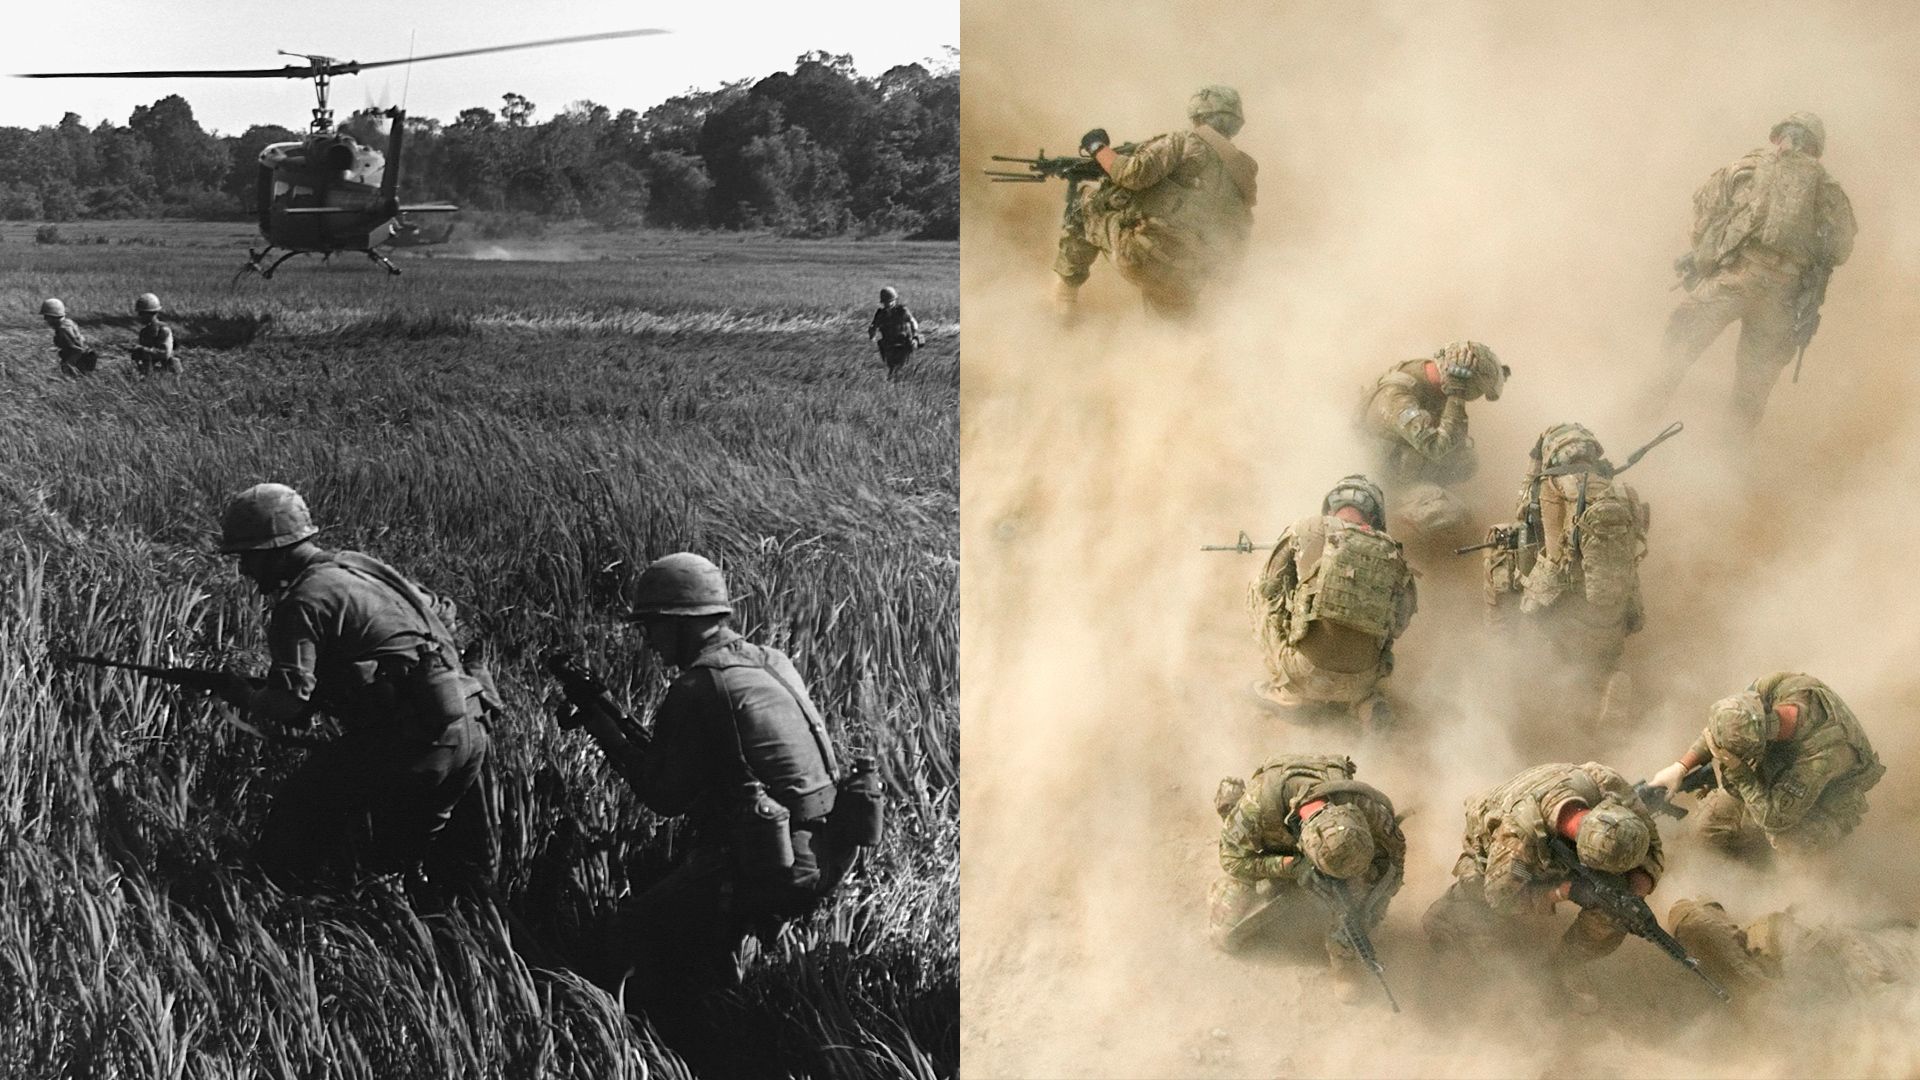 Side by side photos from the Vietnam and Afghanistan wars, showing soldiers being deployed. 